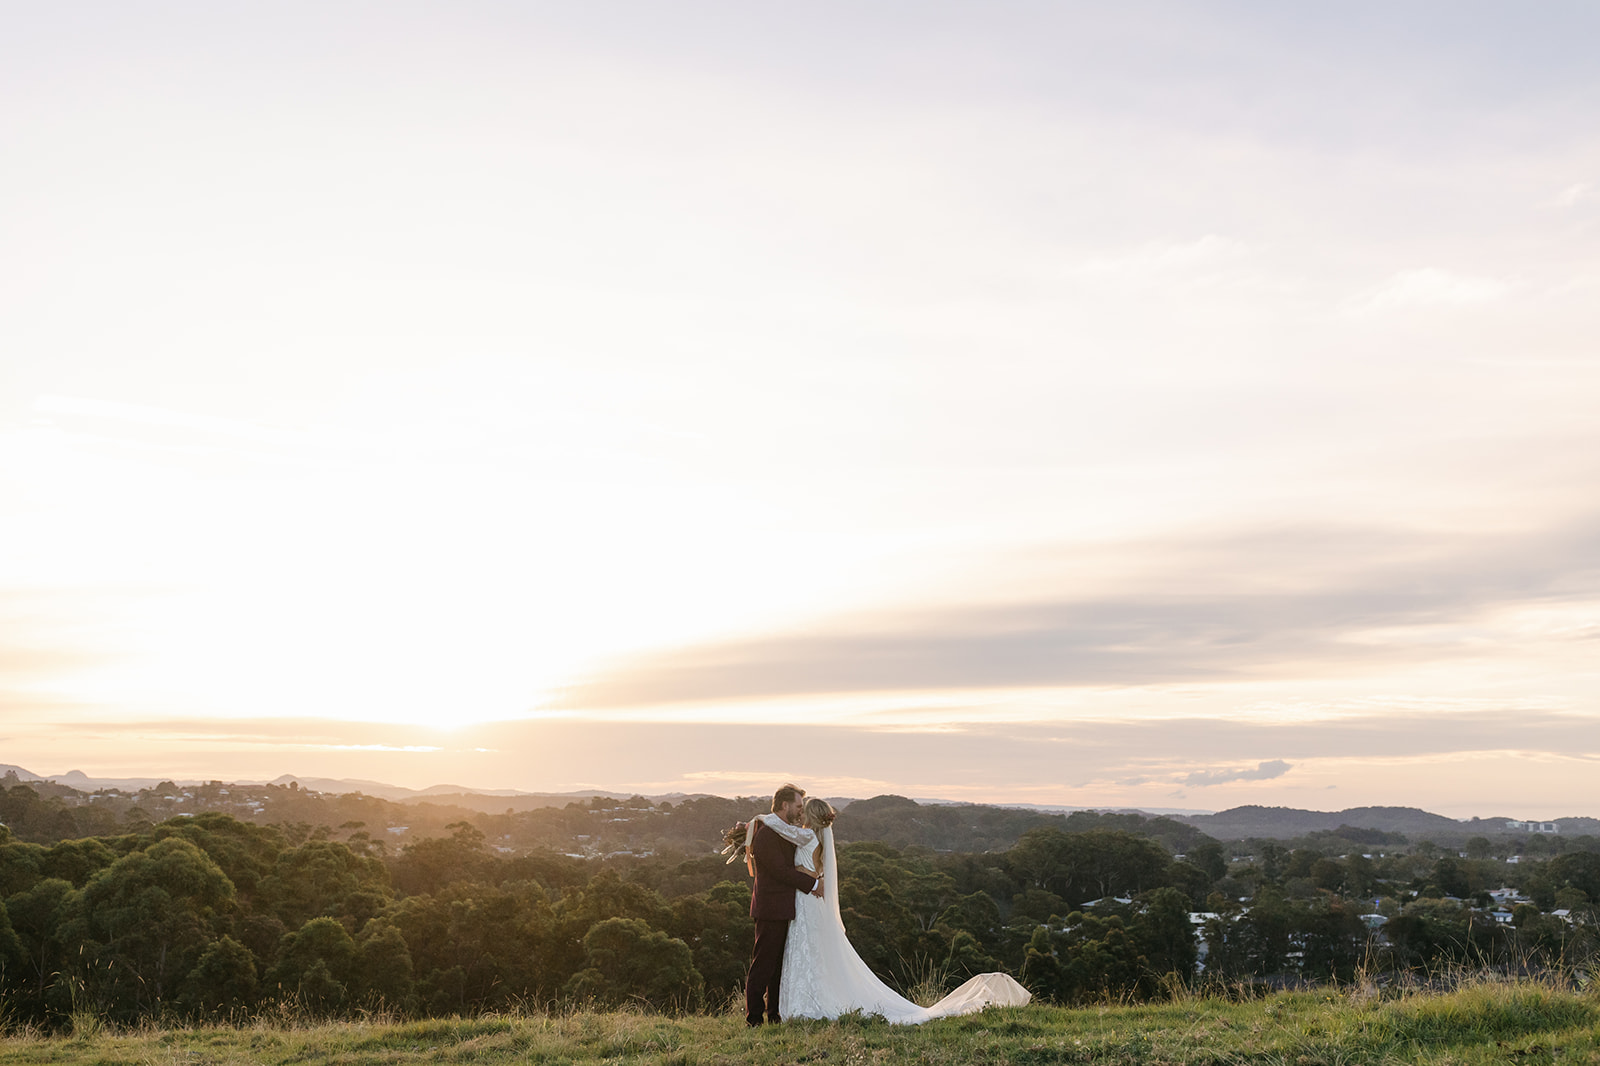 Amy and Daz' Pioneer Country wedding photographed by Beck Roochi